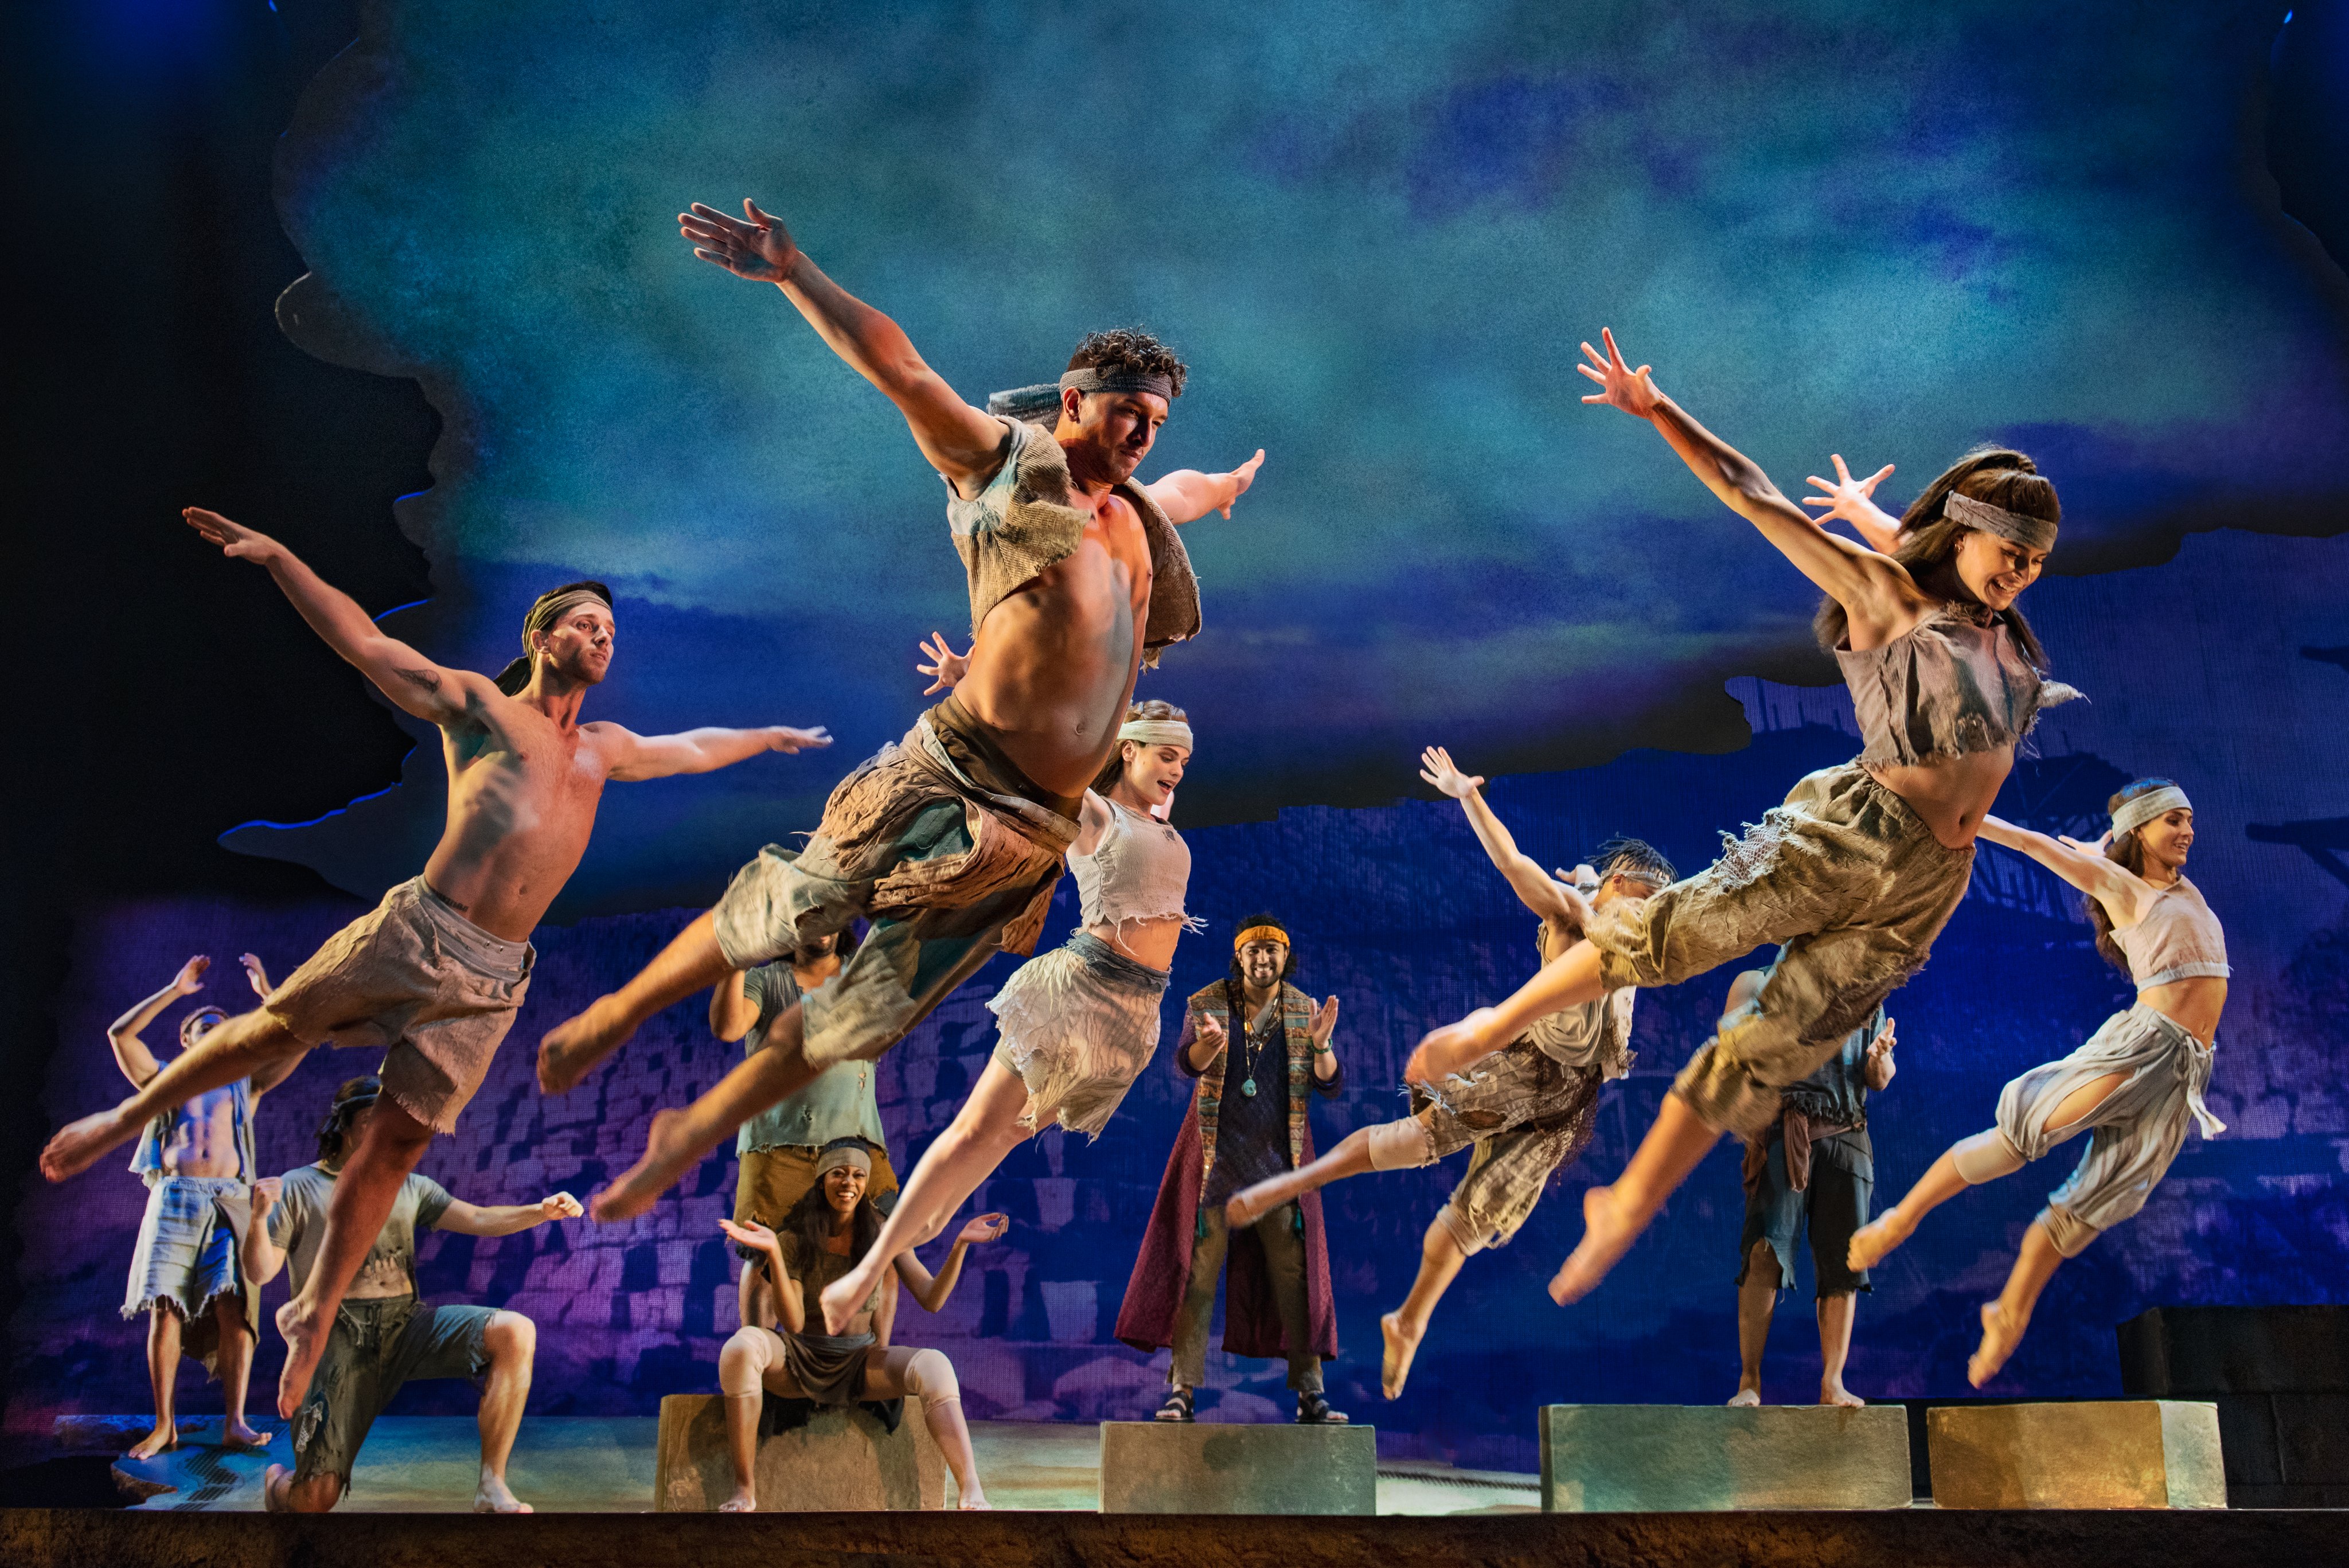 “Prince of Egypt” musical: songs from the summit